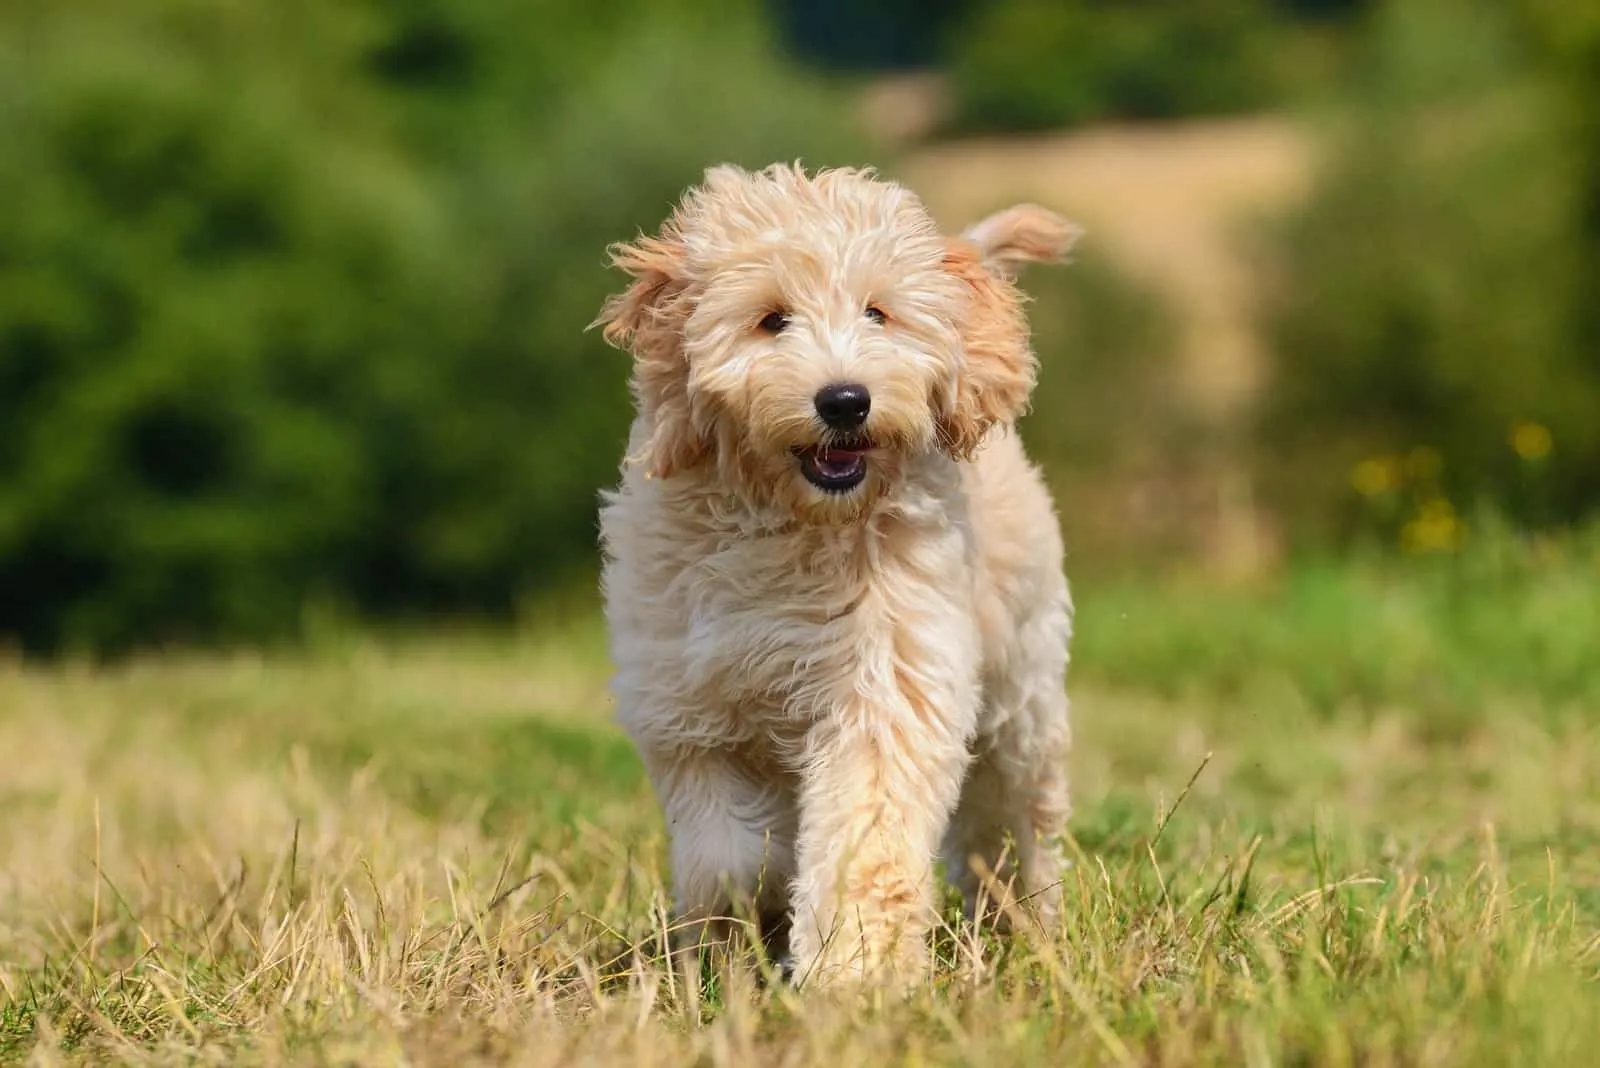 a beautiful goldendoodle dog walks on the grass